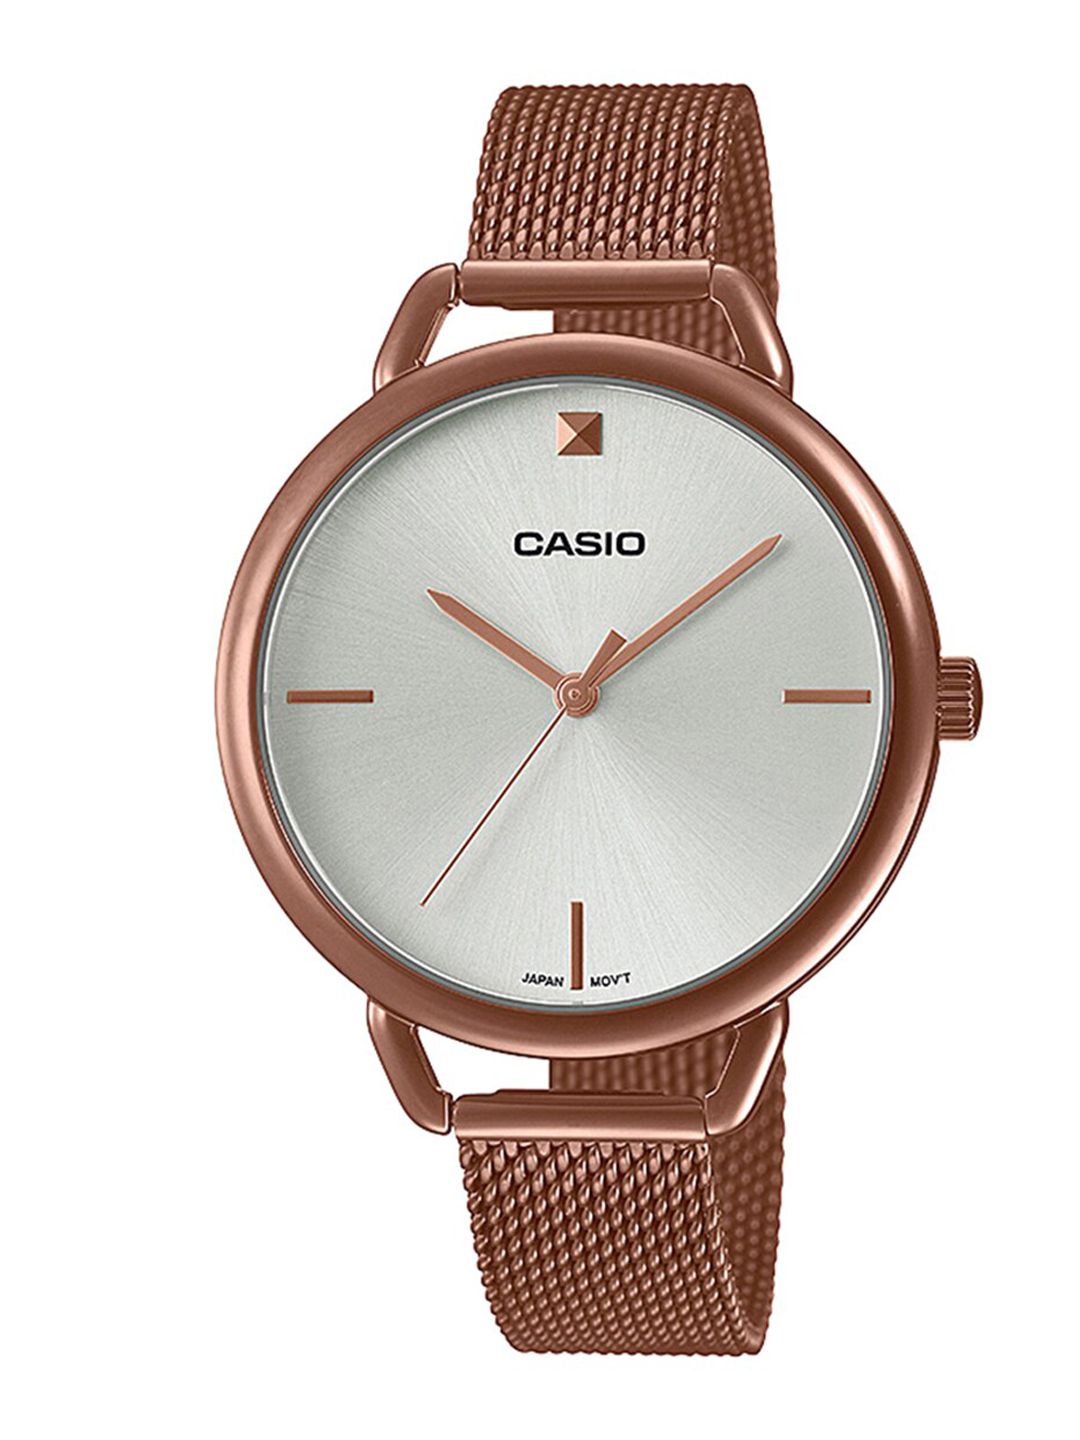 CASIO Enticer Ladies Rose Gold & White Analogue Watch A1812 Price in India